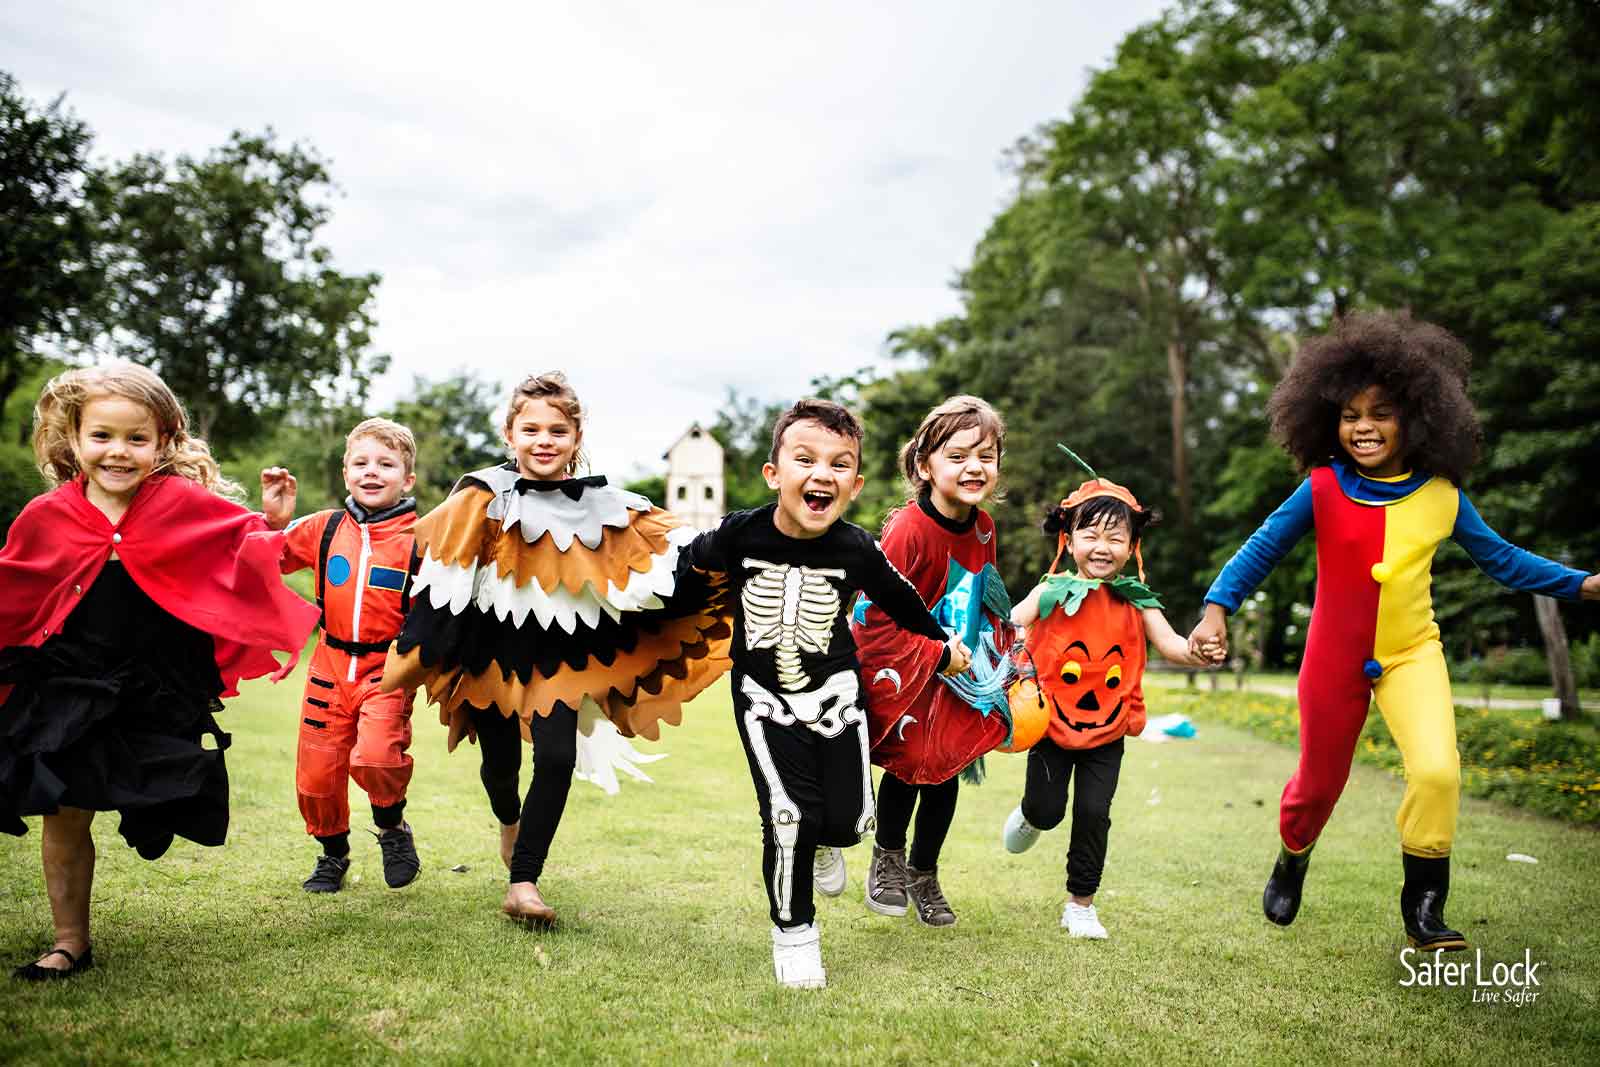 Group of kids trick or treating on Halloween. Get safety tips for a safe and fun holiday at SaferLockrx.com